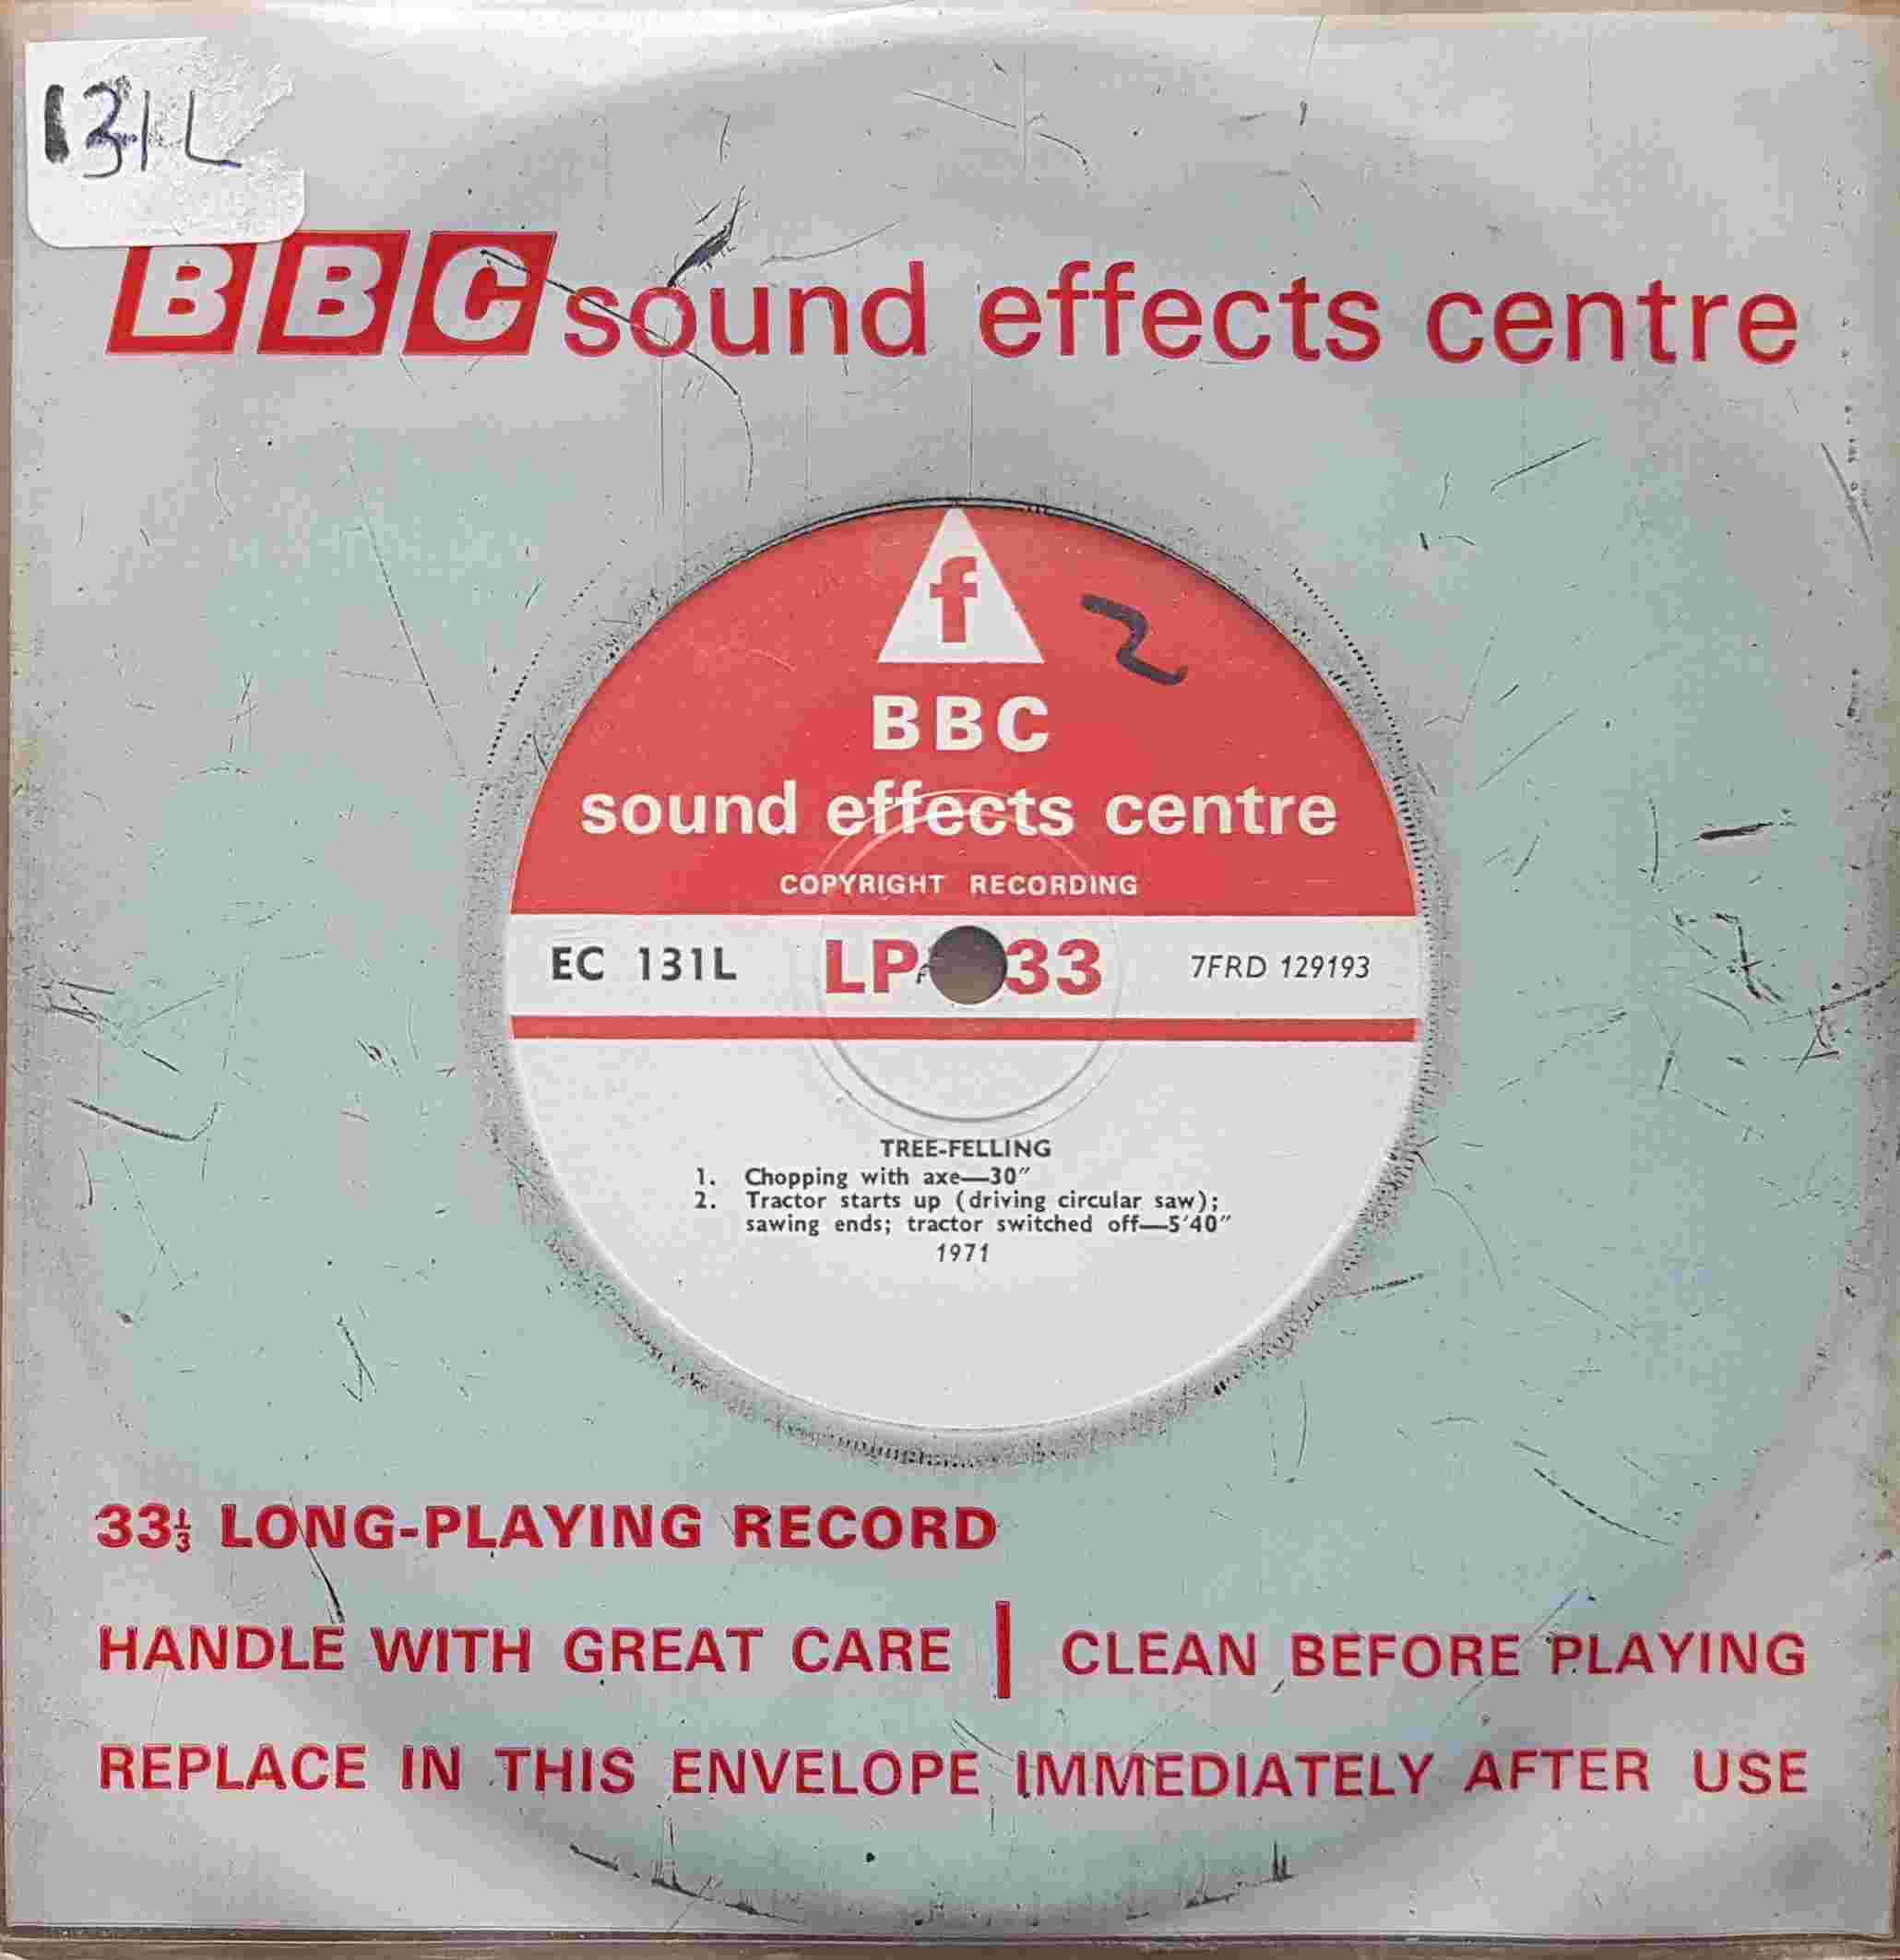 Picture of EC 131L Tree-felling by artist Not registered from the BBC singles - Records and Tapes library